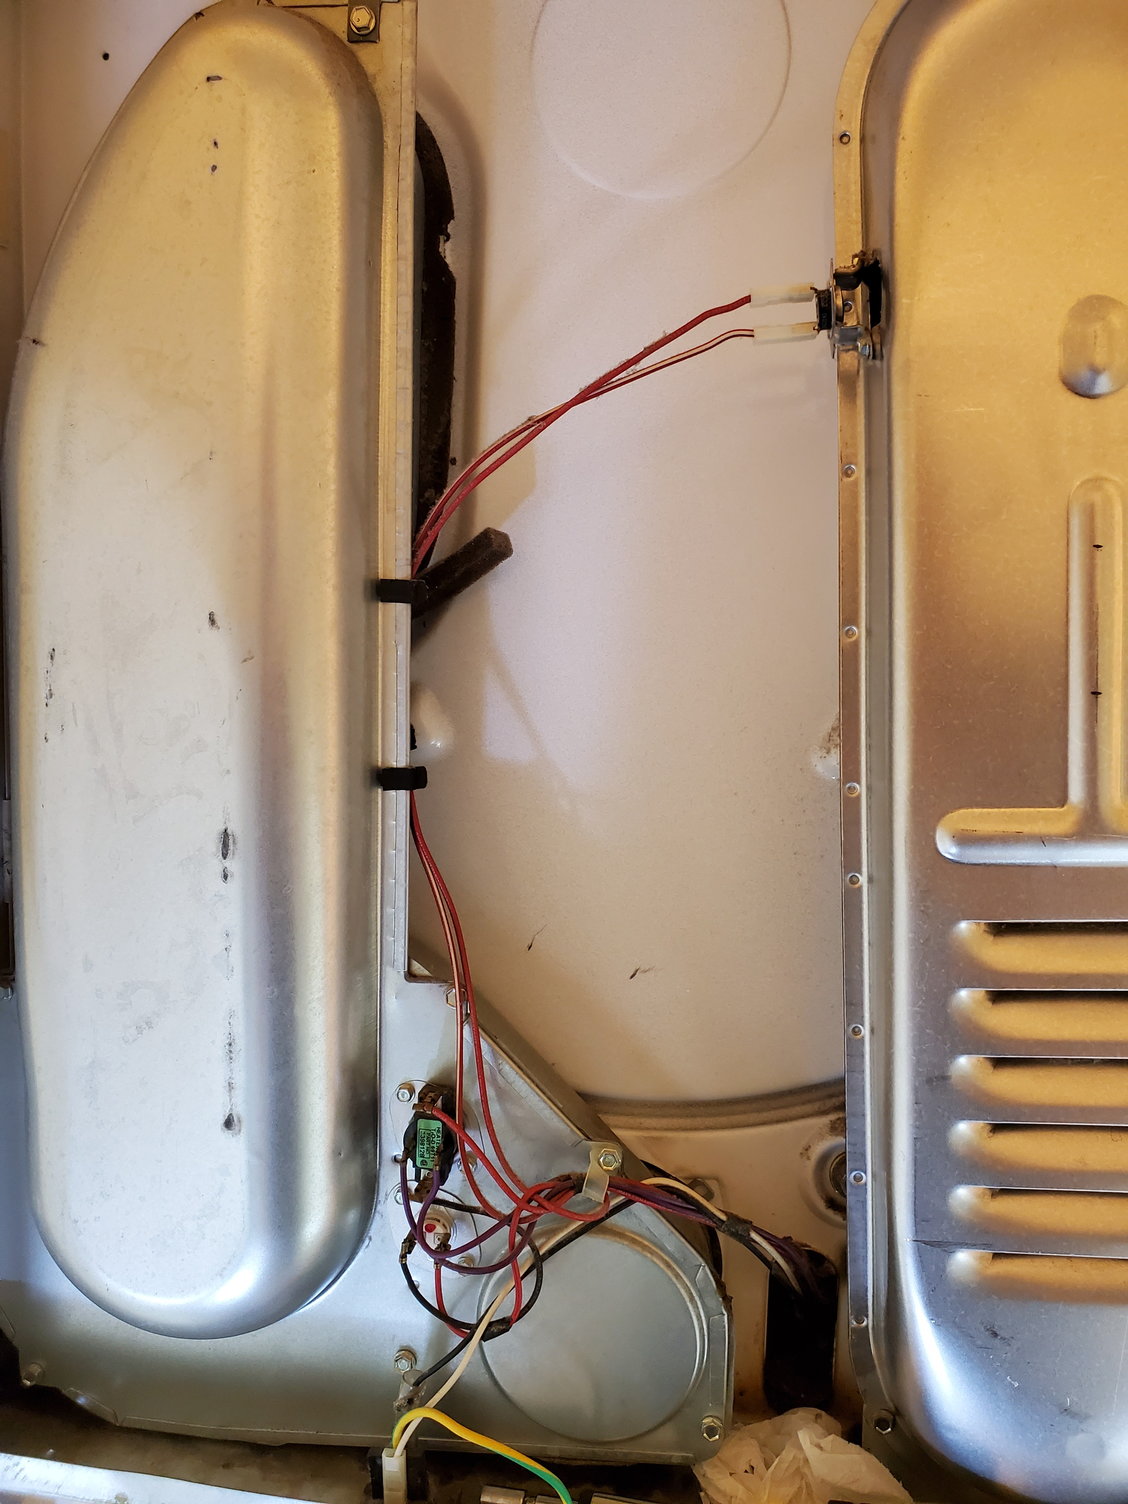 Whirlpool ThinTwin Dryer not working - DoItYourself.com Community Forums